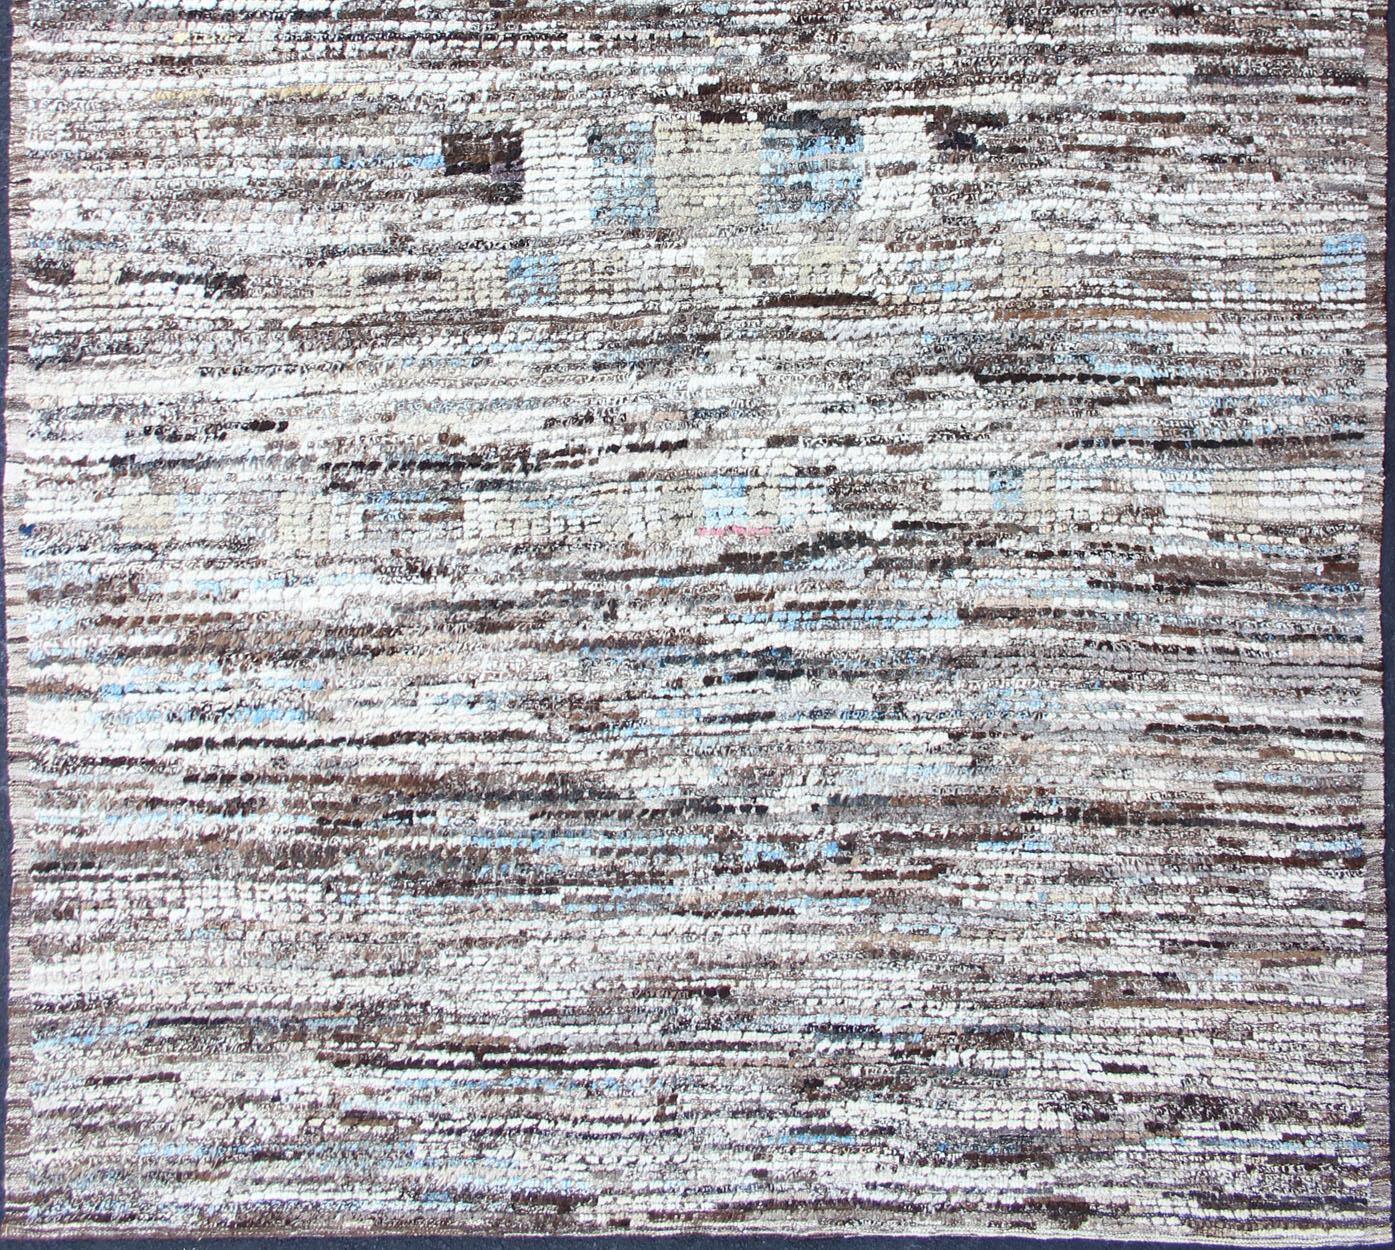 Modern and casual rug. Neutrals, charcoal, gray, blue and brown tribal Afghan Modern Kilim Geometric design. Rug AFG-33309, country of origin / type: Afghanistan / rug

The unique design of this tribal modern rug makes it perfect for modern and